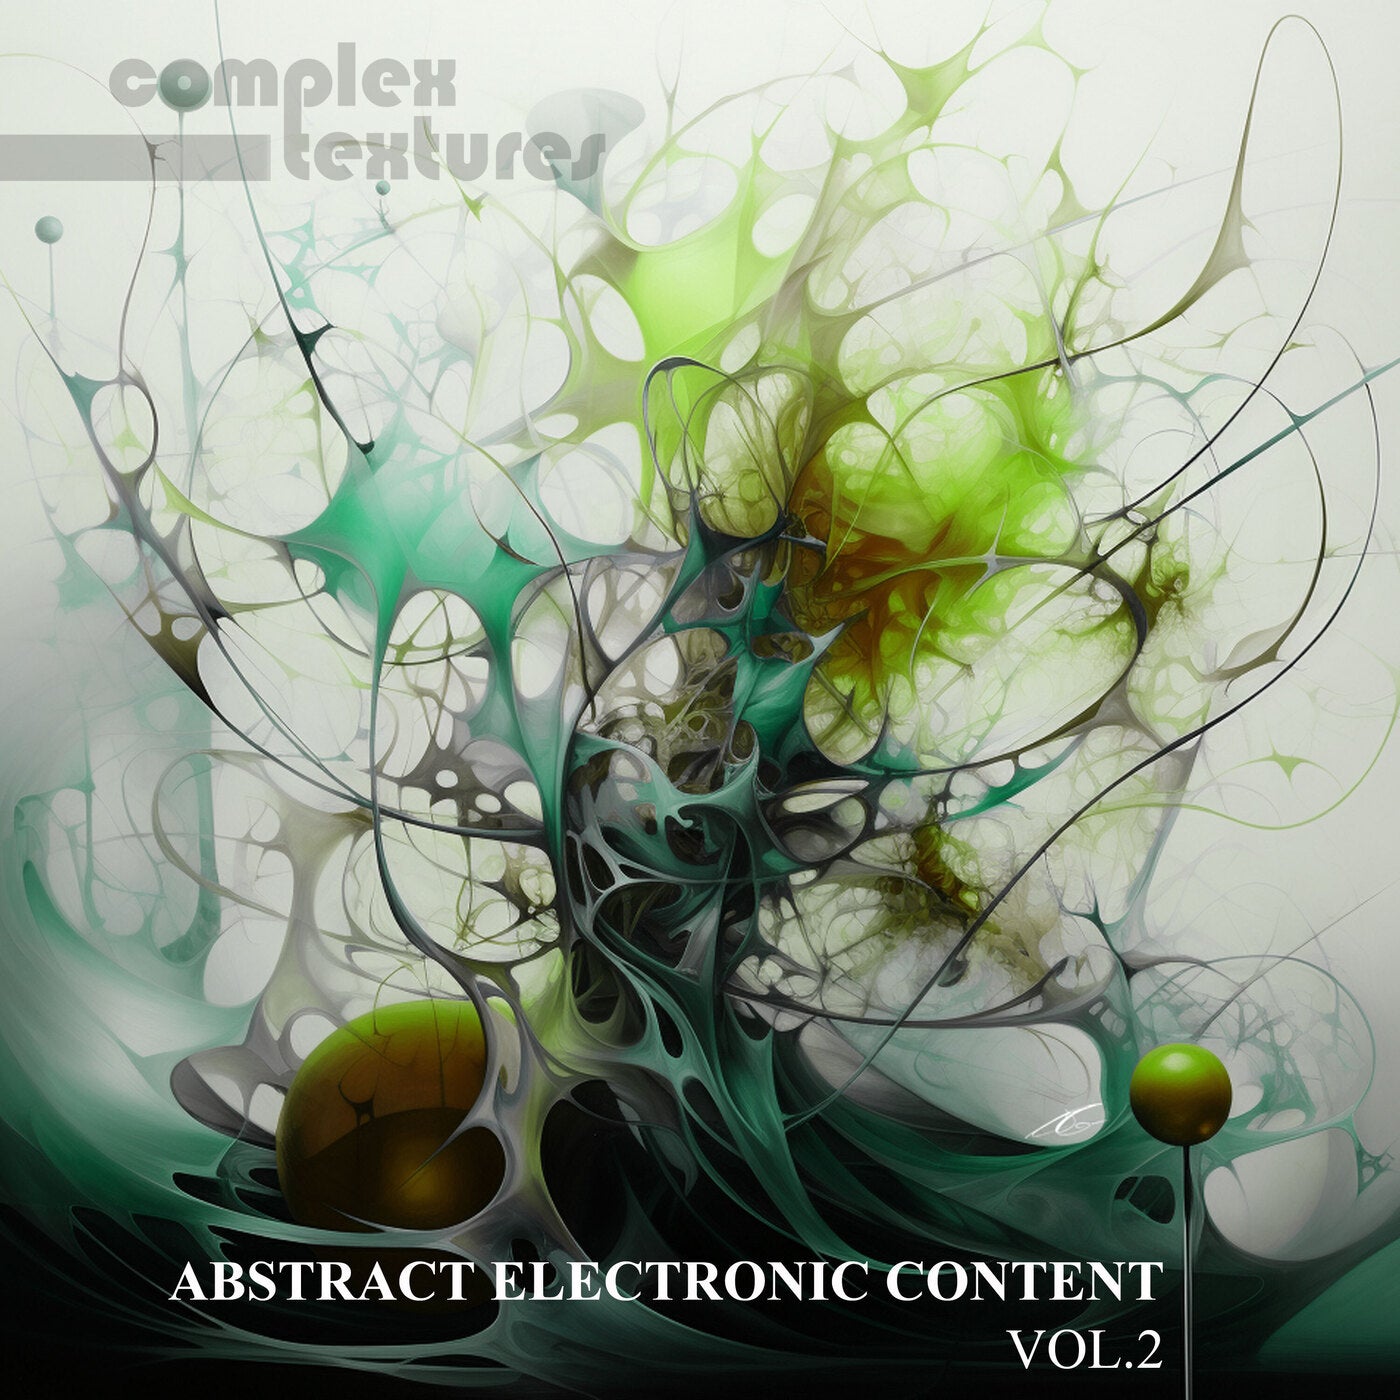 Abstract Electronic Content, Vol. 2